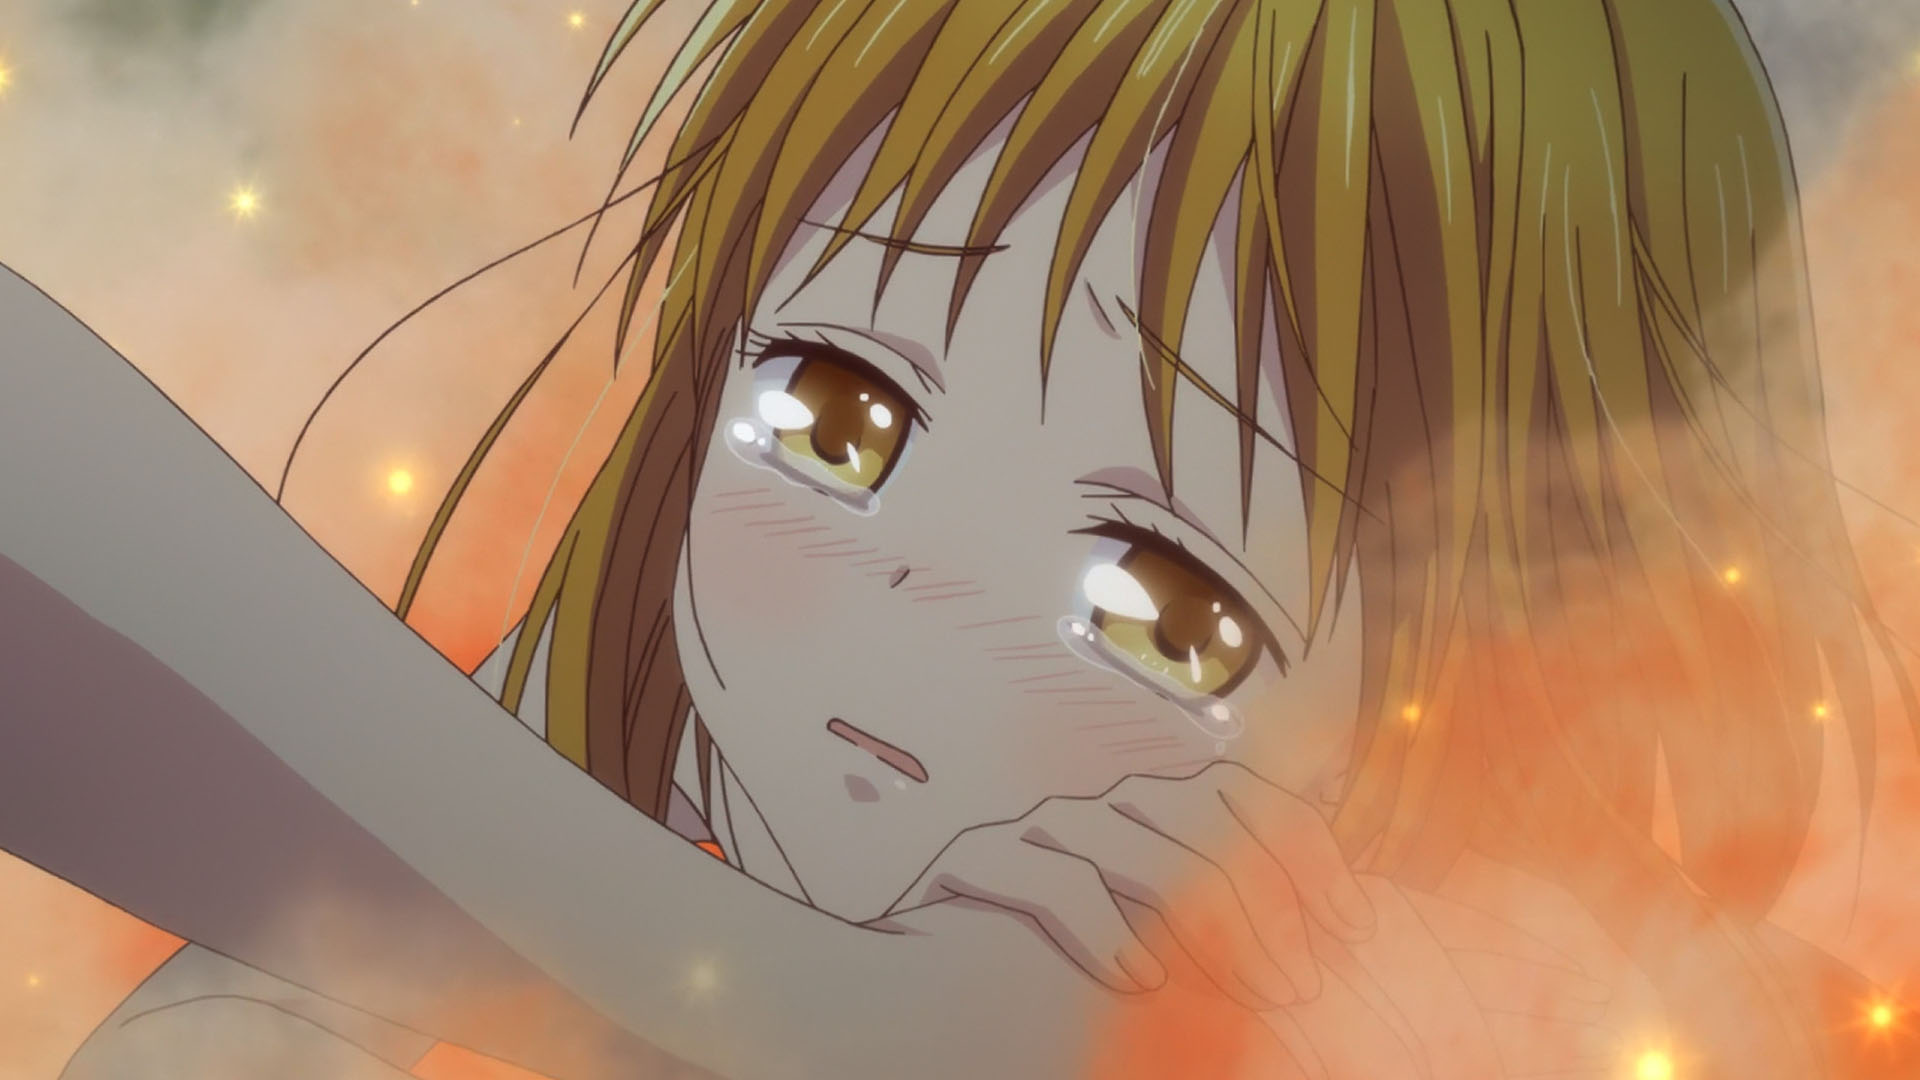 I think what I might love most about Fruits Basket is how everyone can take...